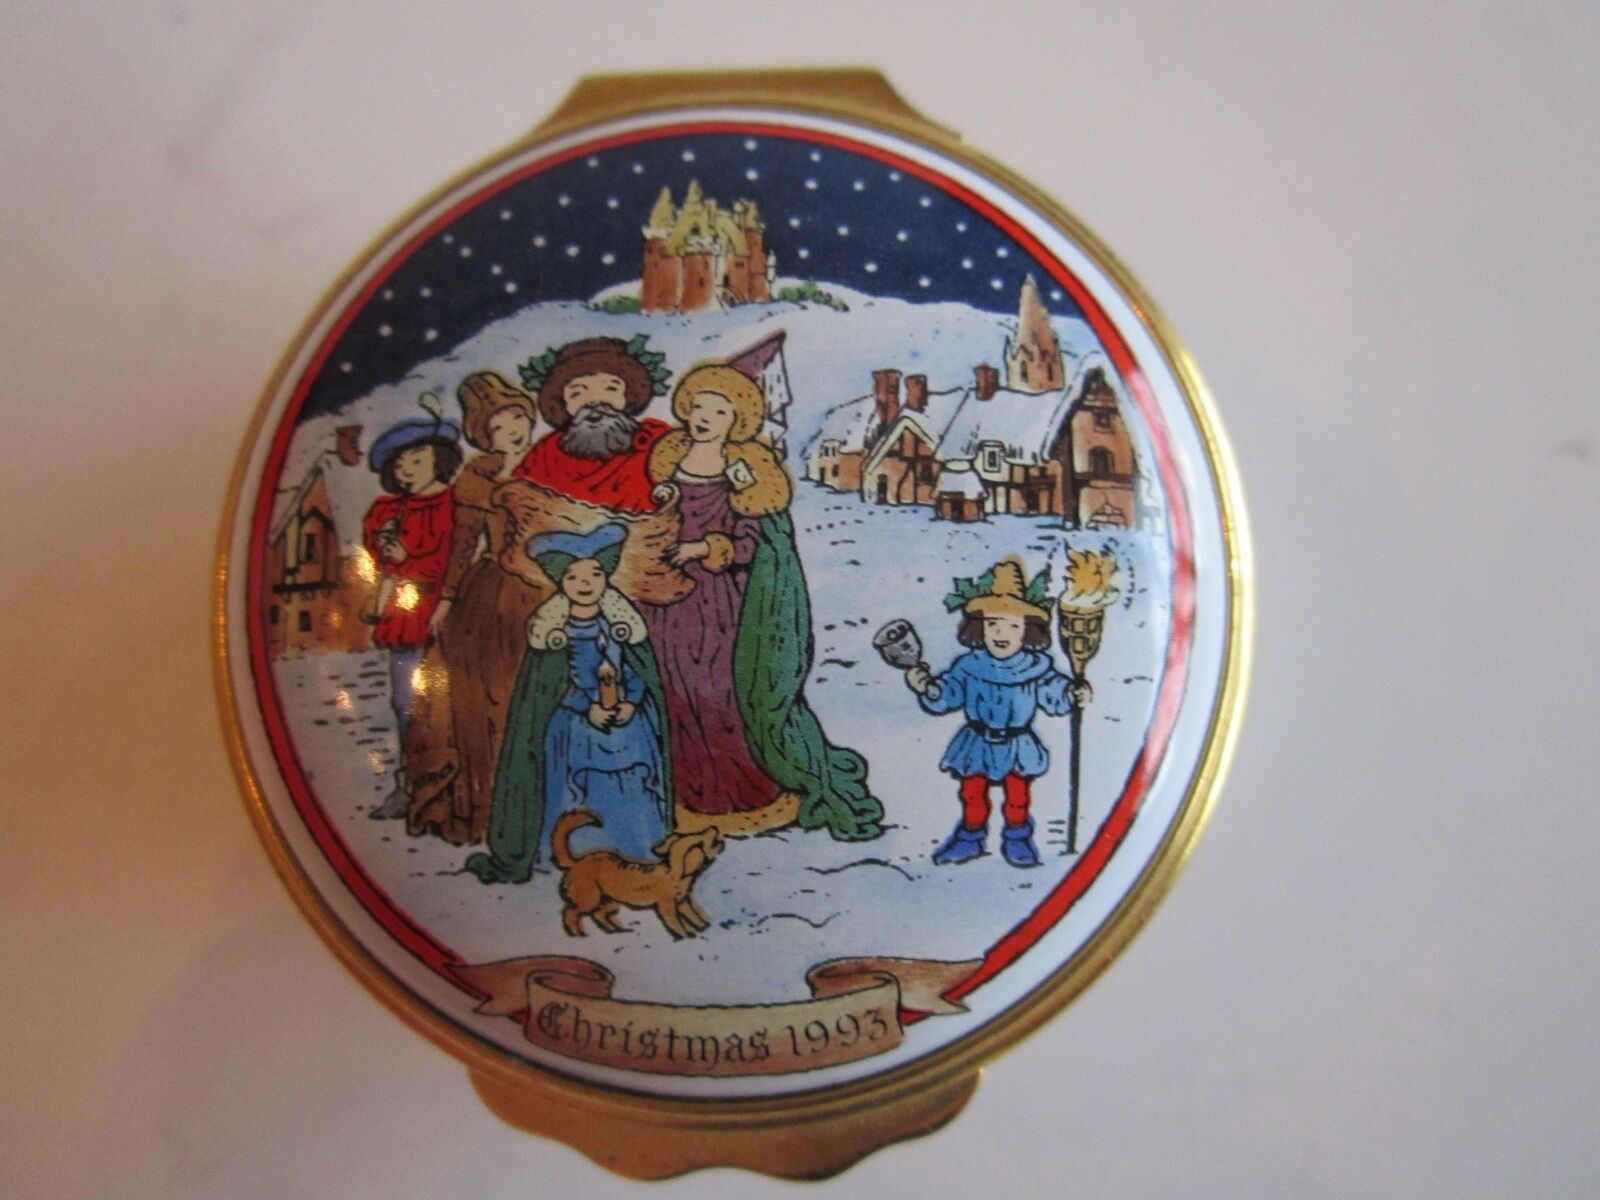 1993 HALCYON DAYS ENAMEL CHRISTMAS BOX - IN THE BOX WITH CERTIFICATE - MINT COND